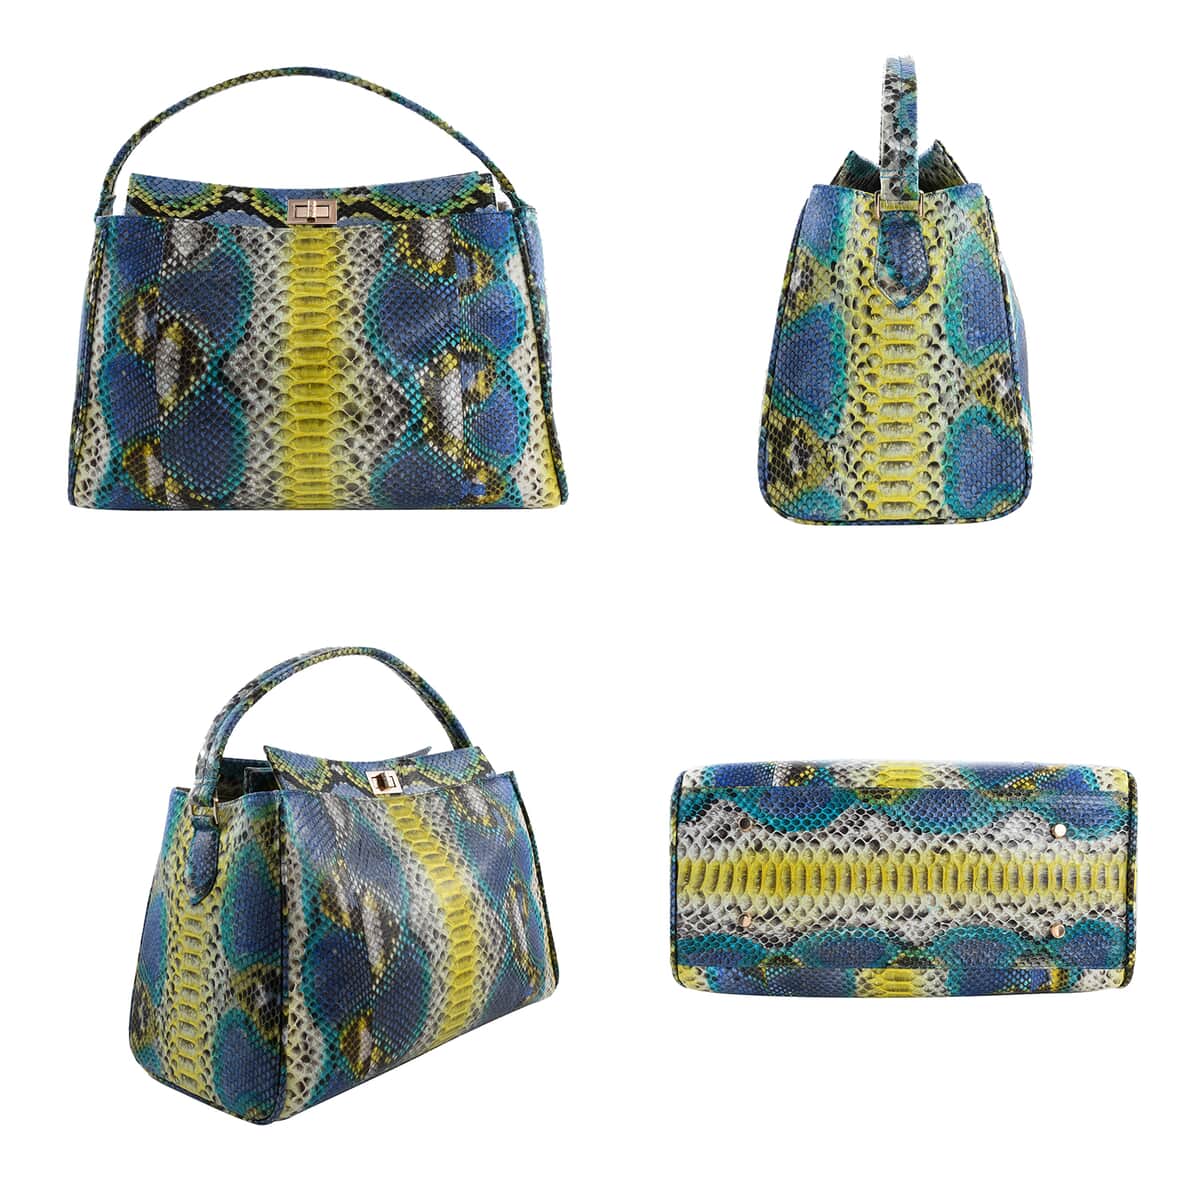 The Pelle Python Collection Handmade 100% Genuine Python Leather Blue & Yellow Tote Bag (14.75"x9.2"x6") with Detachable and Adjustable Strap image number 1